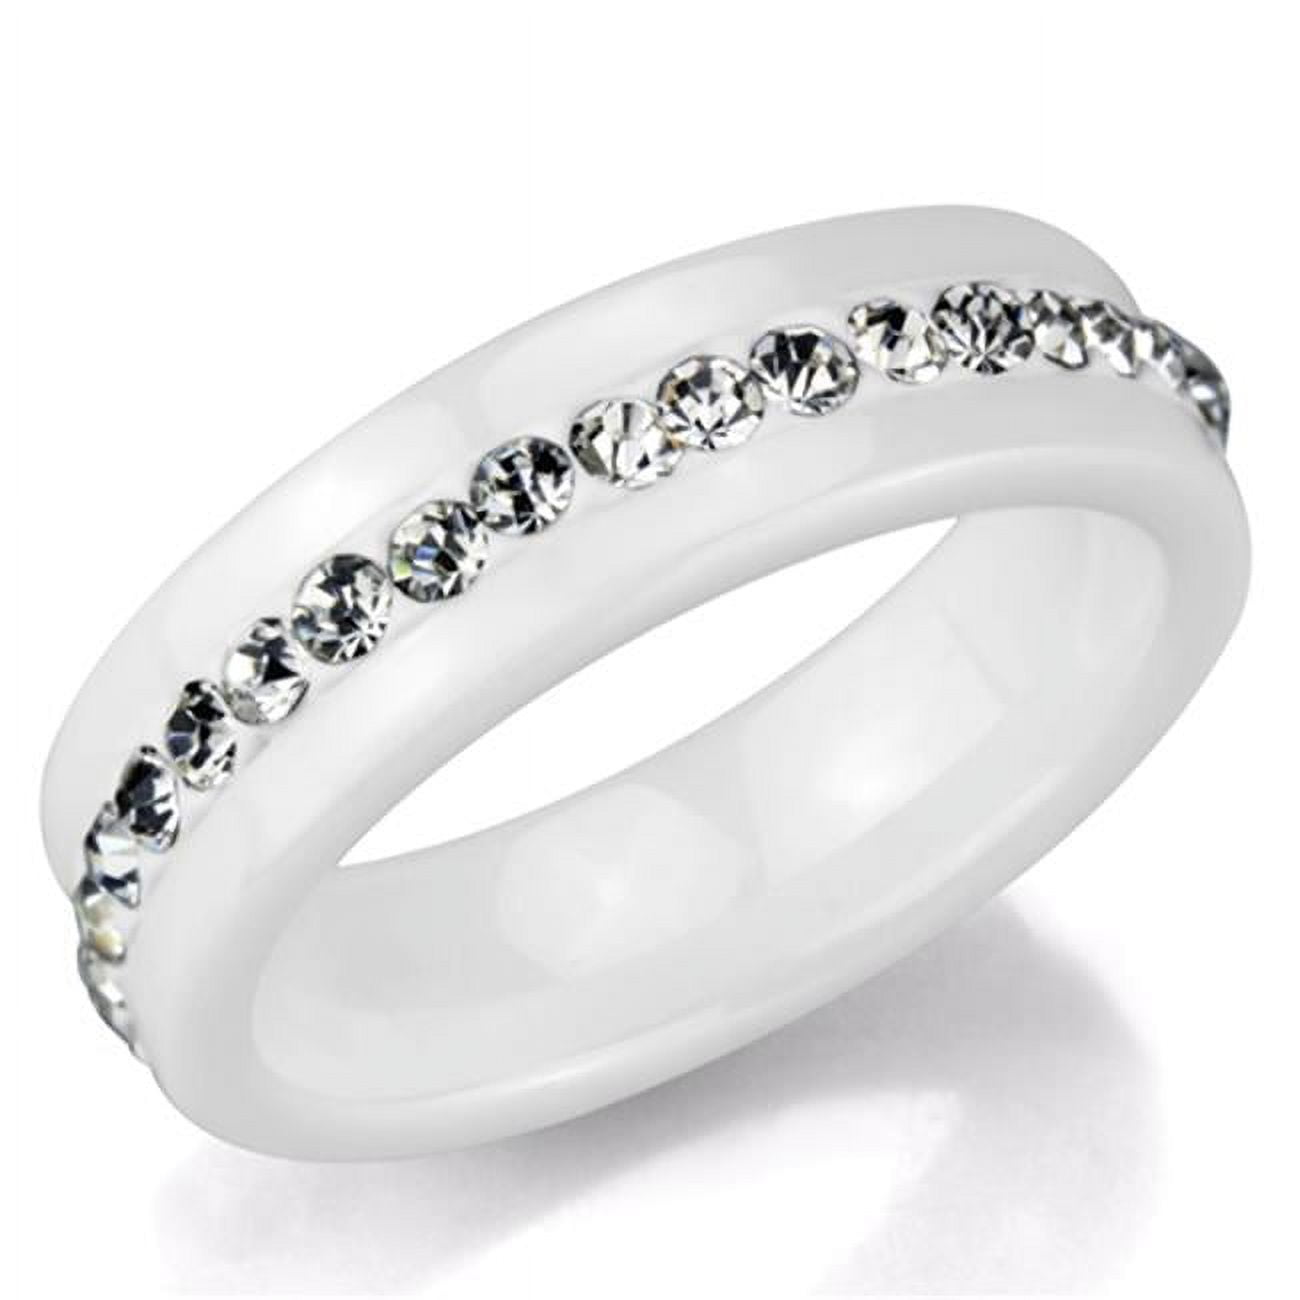 Picture of Alamode 3W968-7 Women High Polished Stainless Steel Ring with Ceramic in White - Size 7